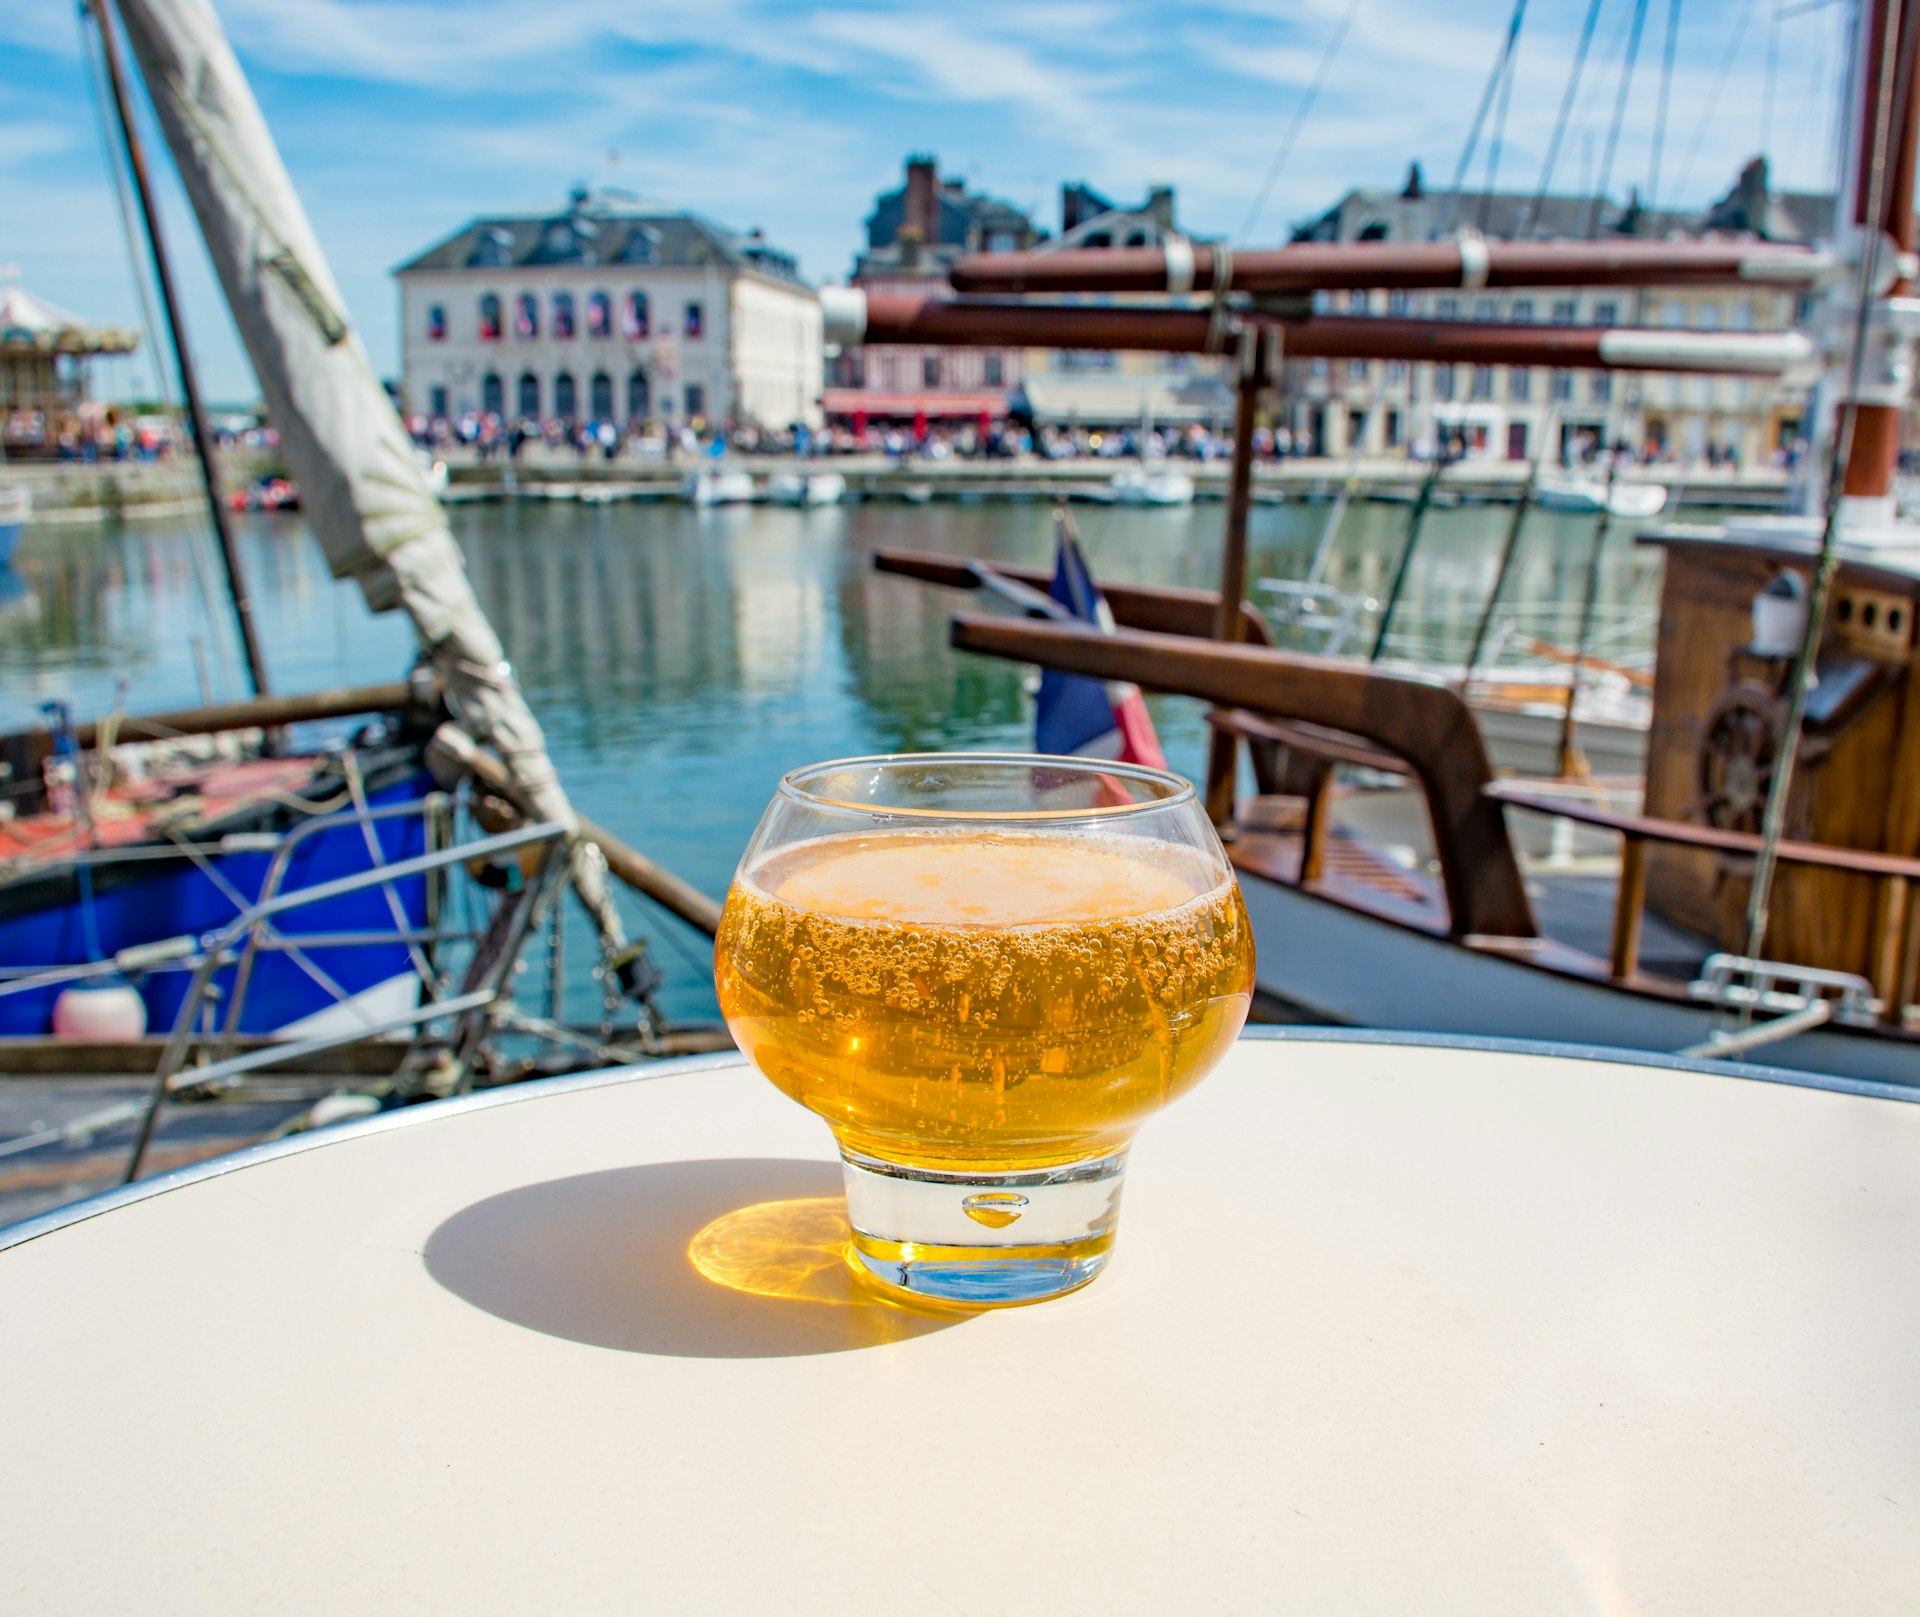 A glass of cider on a table by the harbor